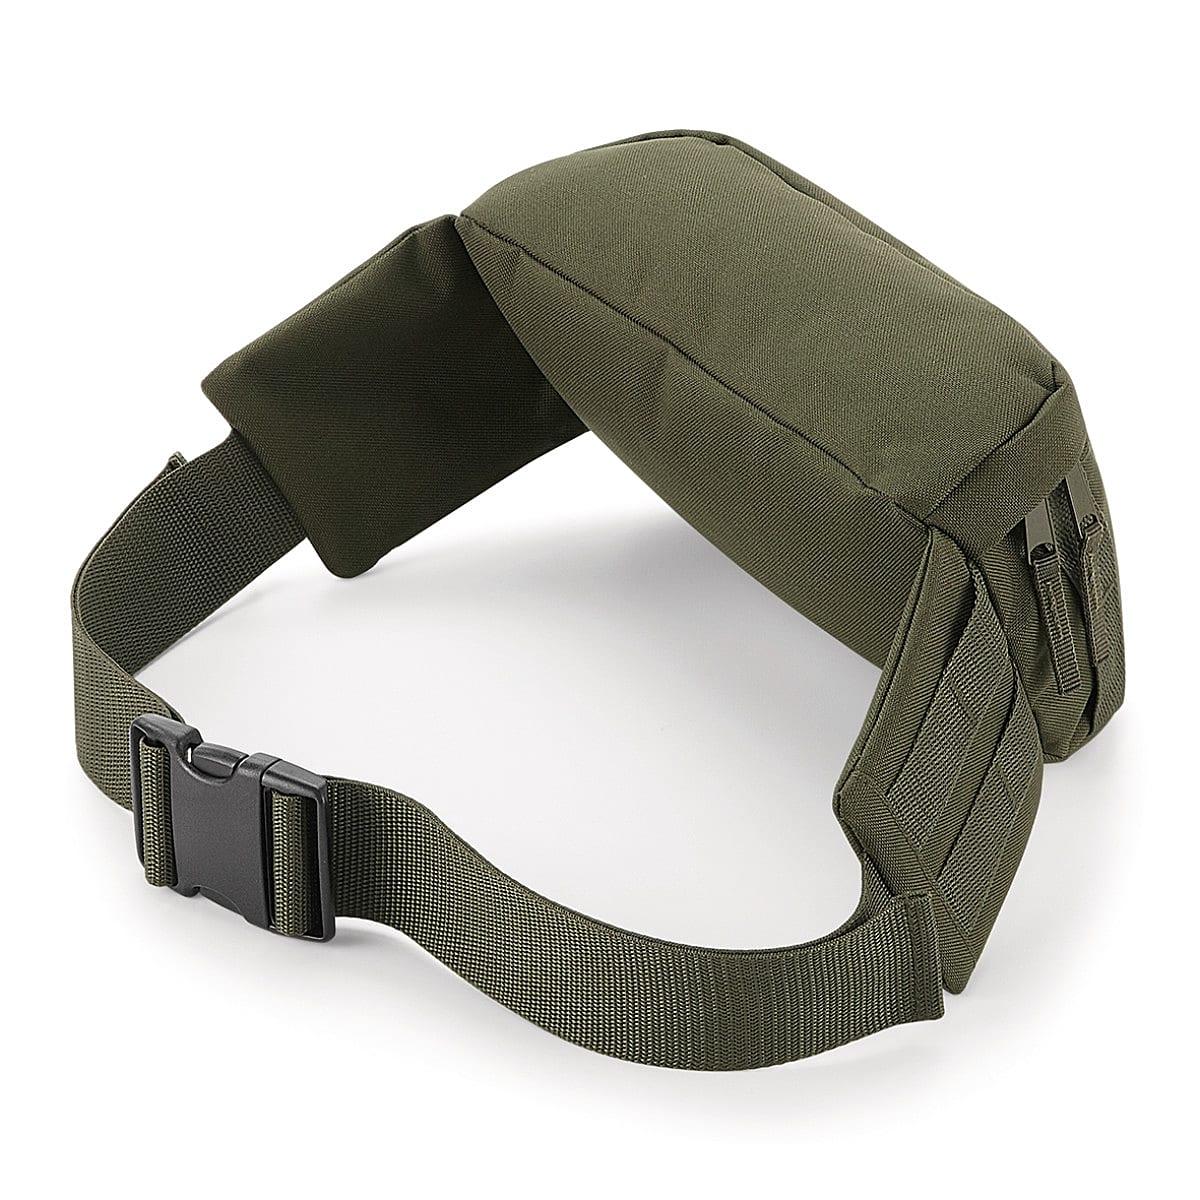 Bagbase Molle Utility Waistpack in Military Green (Product Code: BG842)